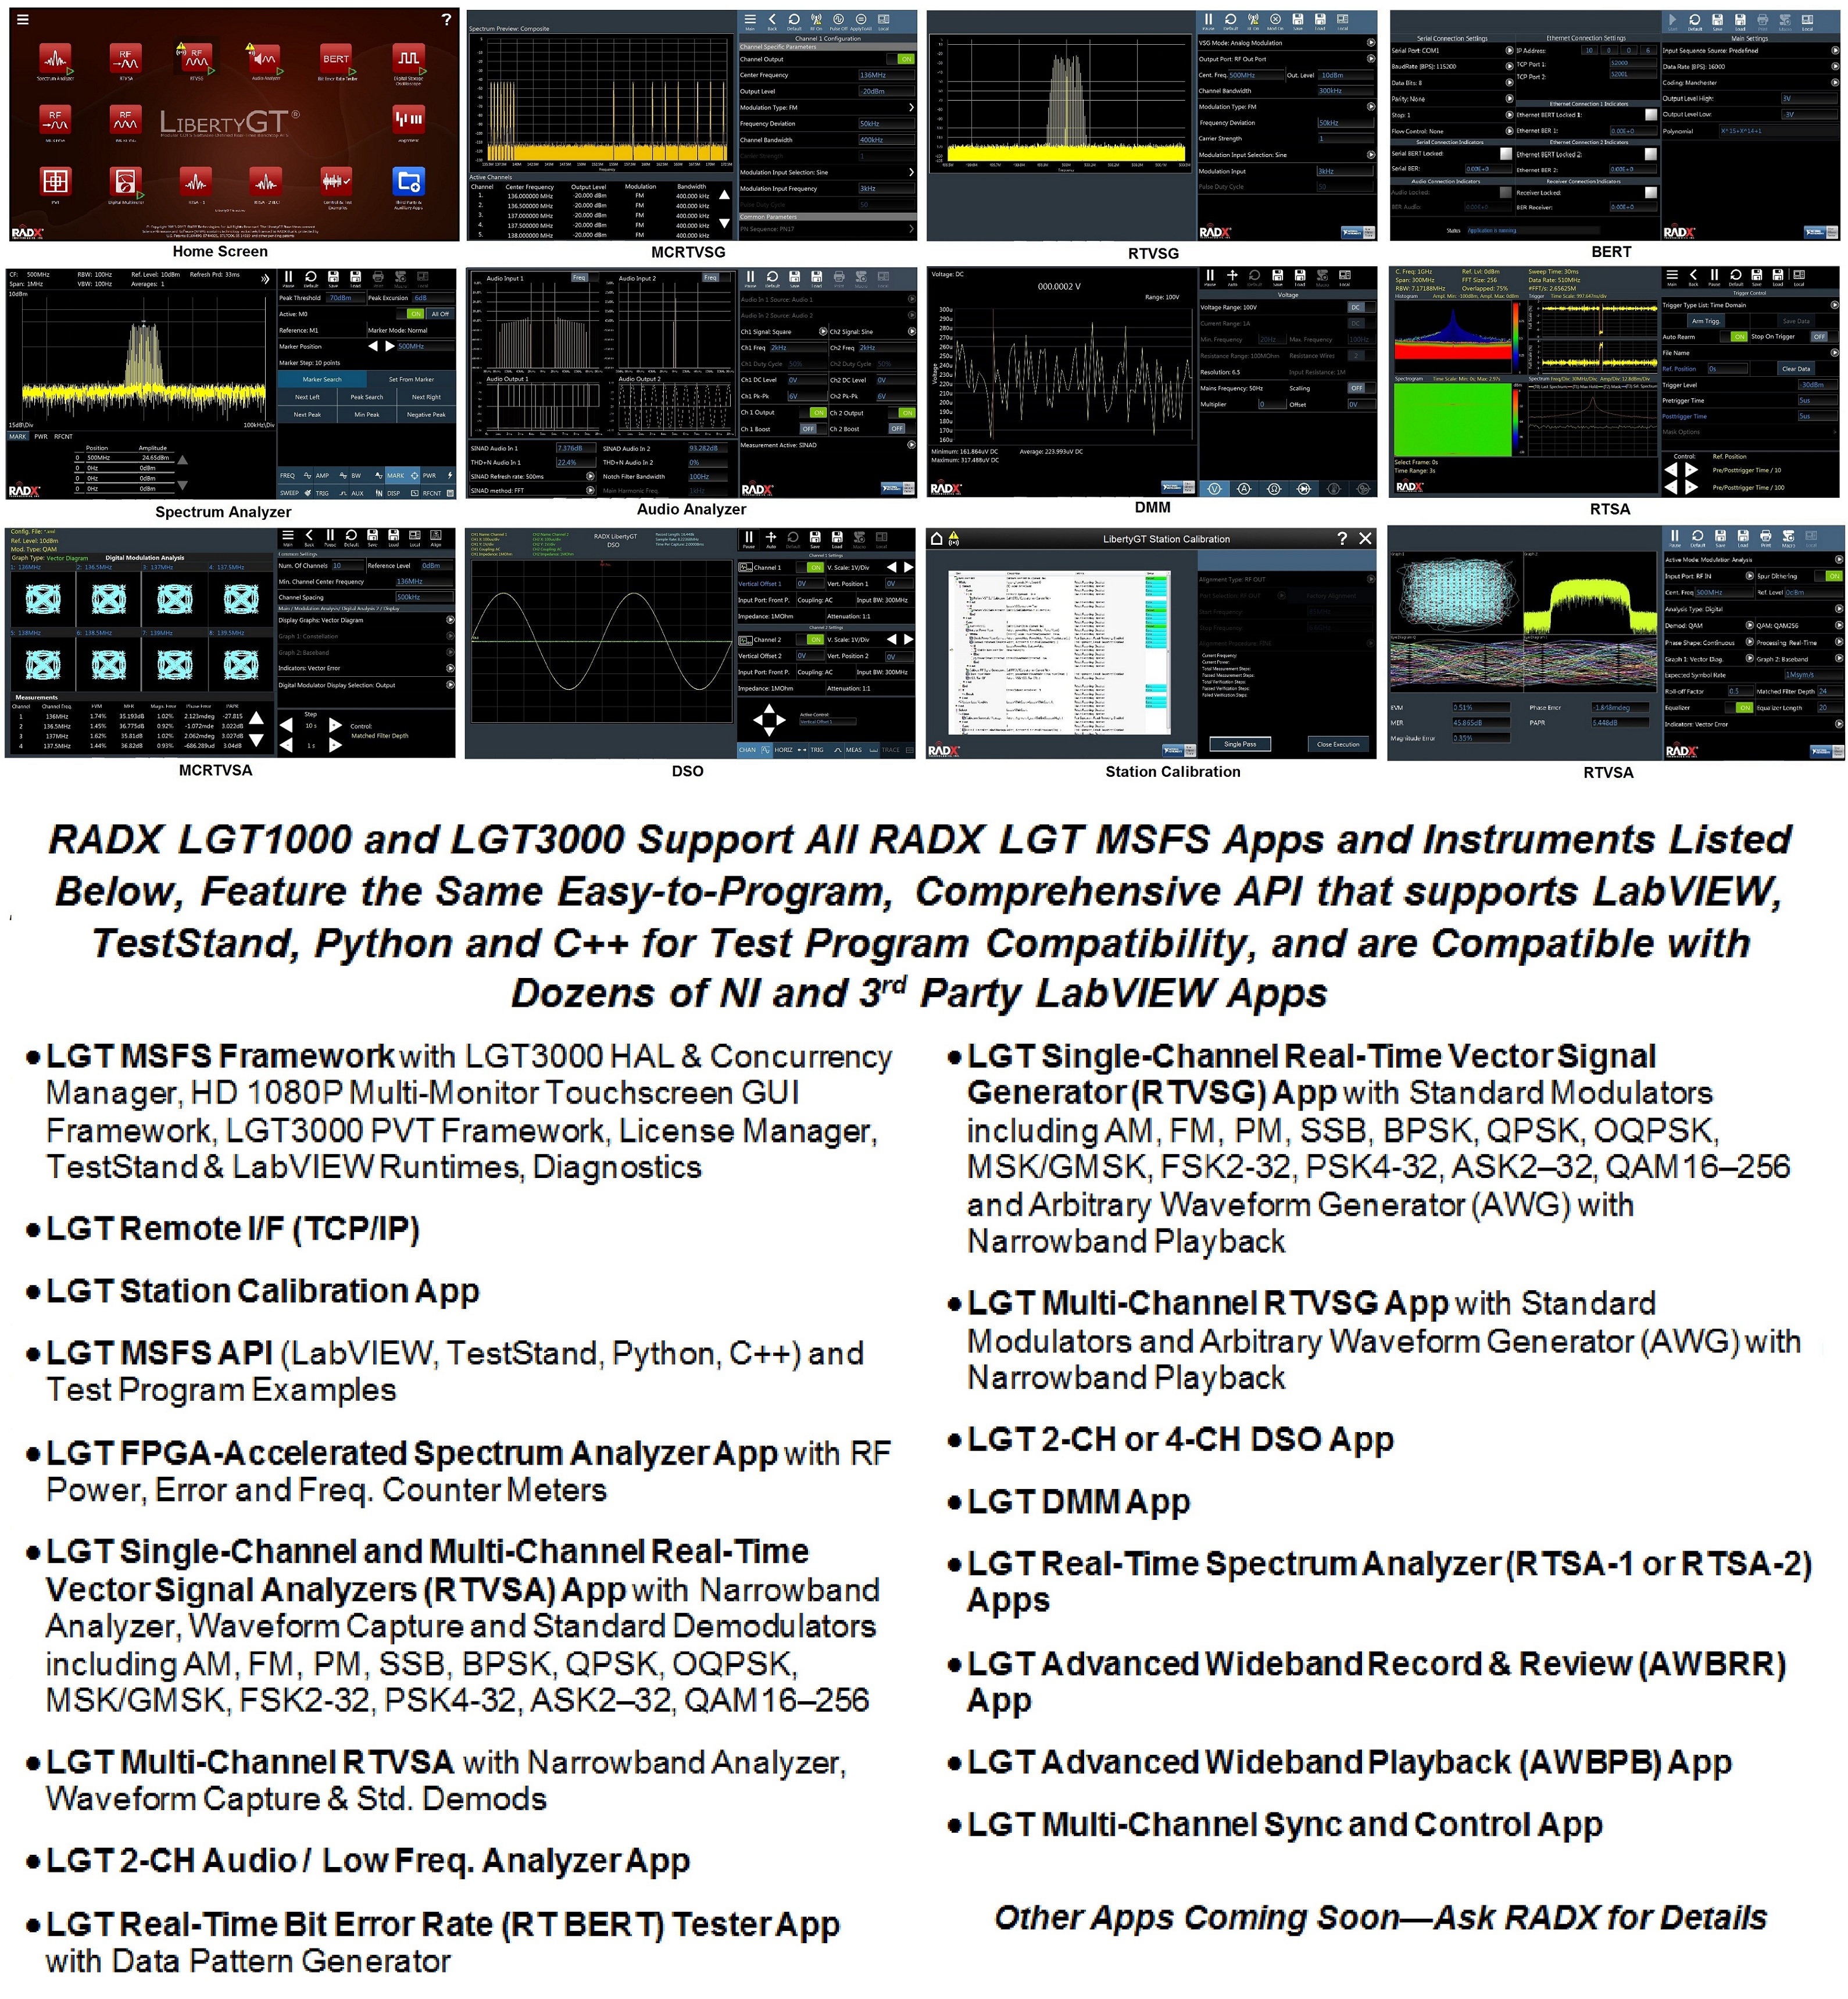 RADX LibertyGT 1000 (PXIe) and LibertyGT 3000 (SDR) Support  the Same, Comprehensive Suite of Real-Time RF T&M, Spectrum Analysis and Other Apps